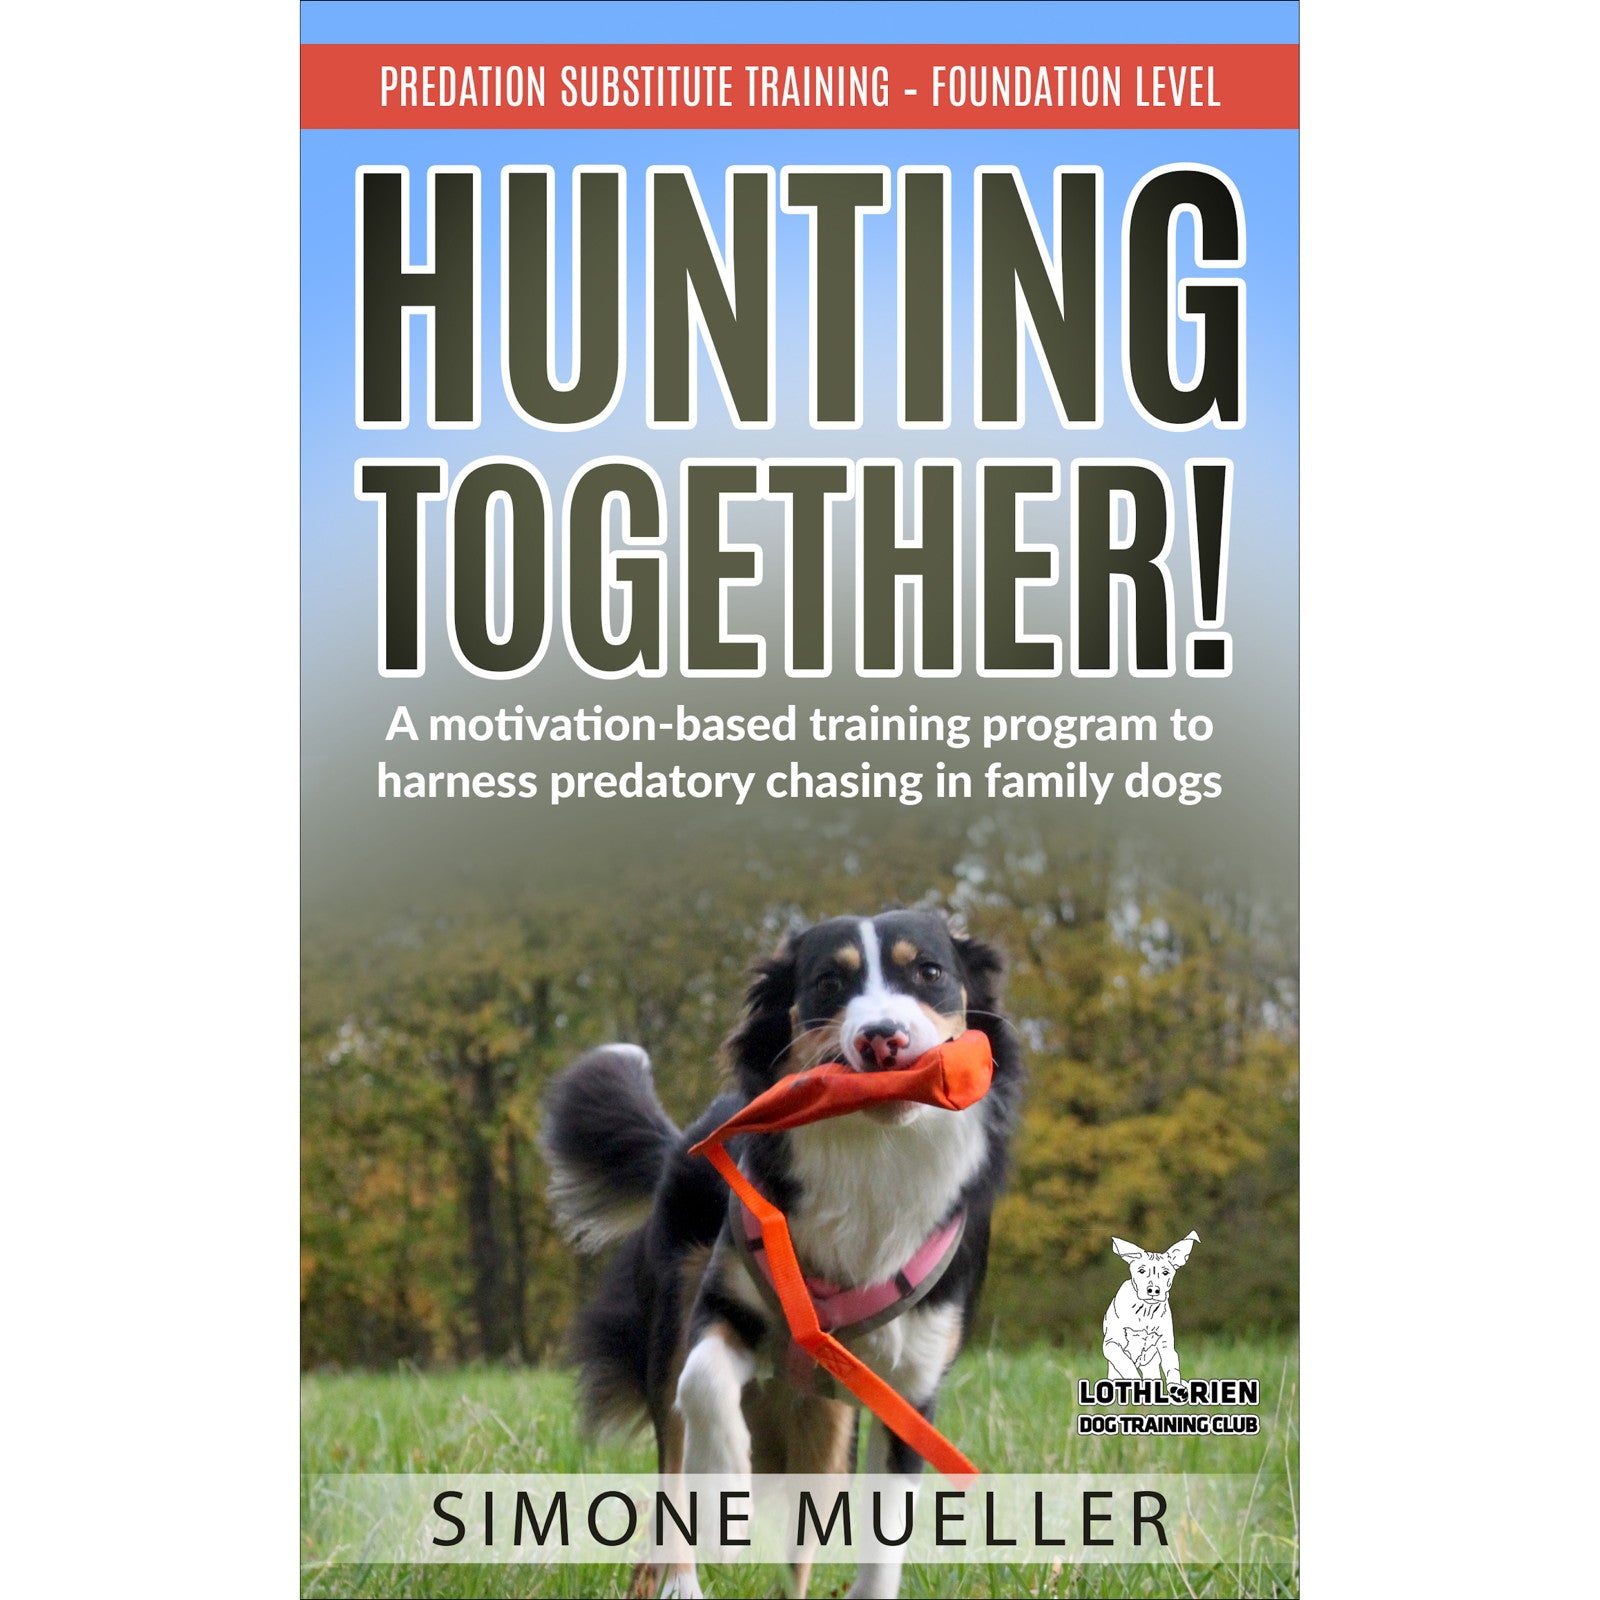 Hunting Together! Predation Substitute Training first Edition by Simone Mueller